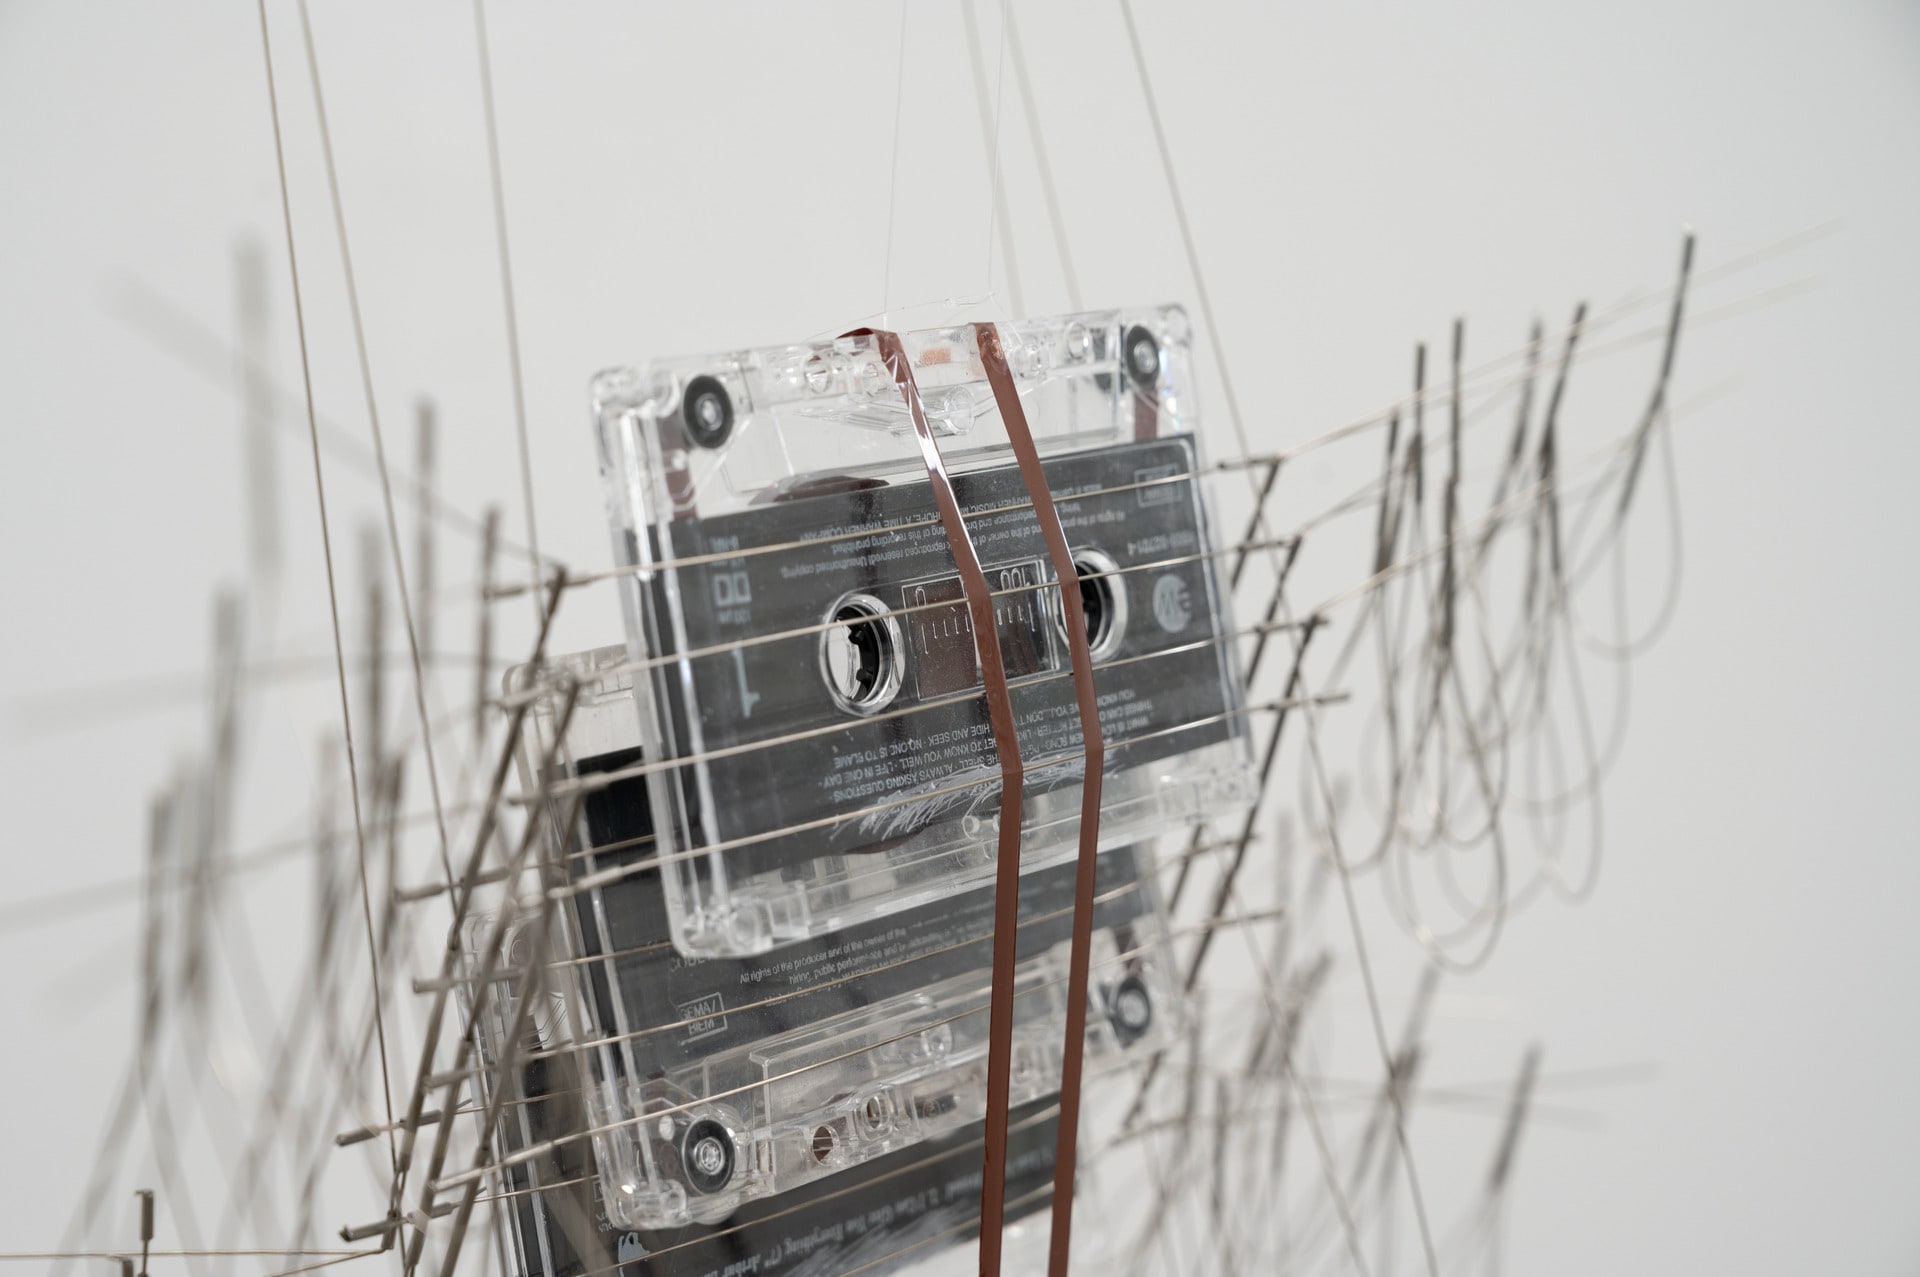 'I don’t need any words.’, Cassette tape, stainless steel wire/tube